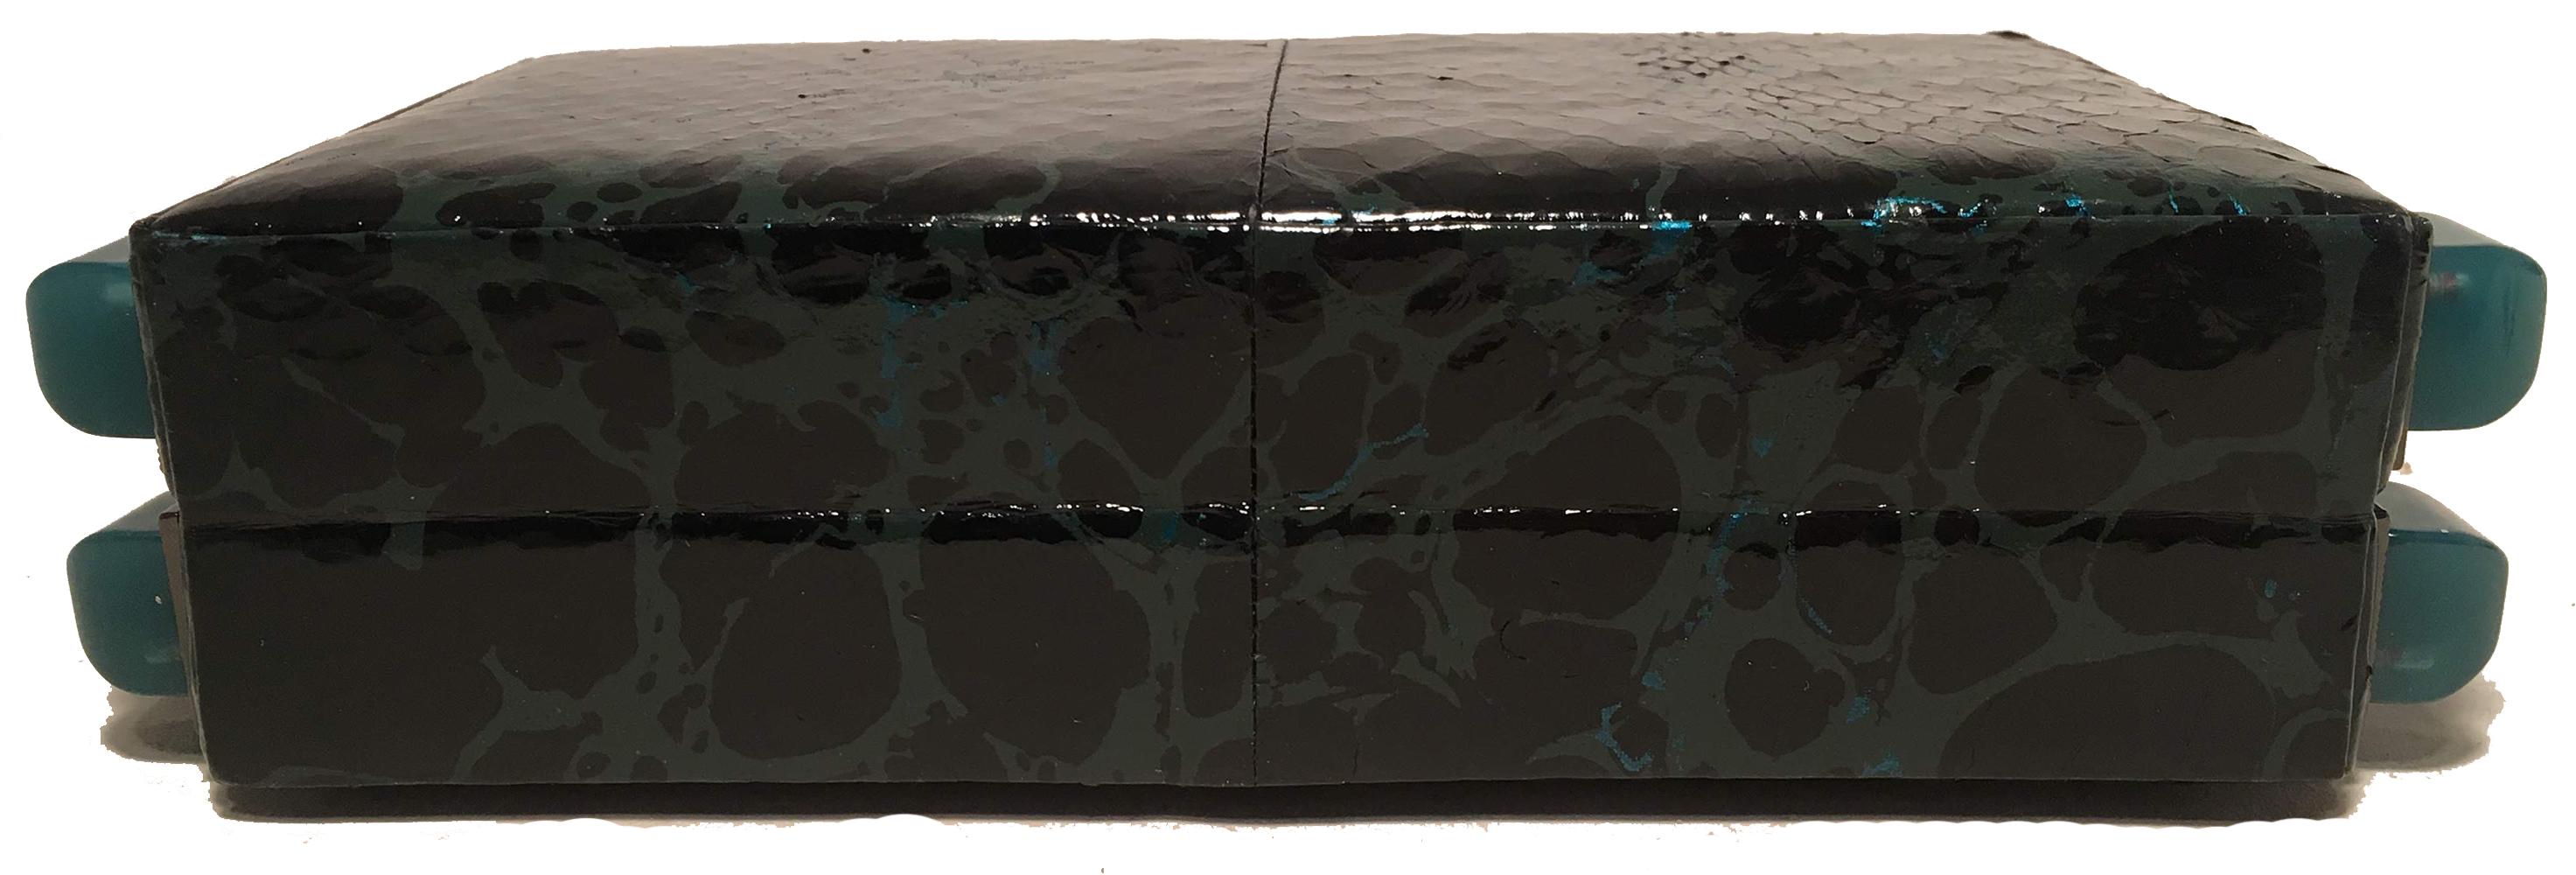 Tonya Hawkes Black Teal Paint Splatter Clutch In Excellent Condition For Sale In Philadelphia, PA